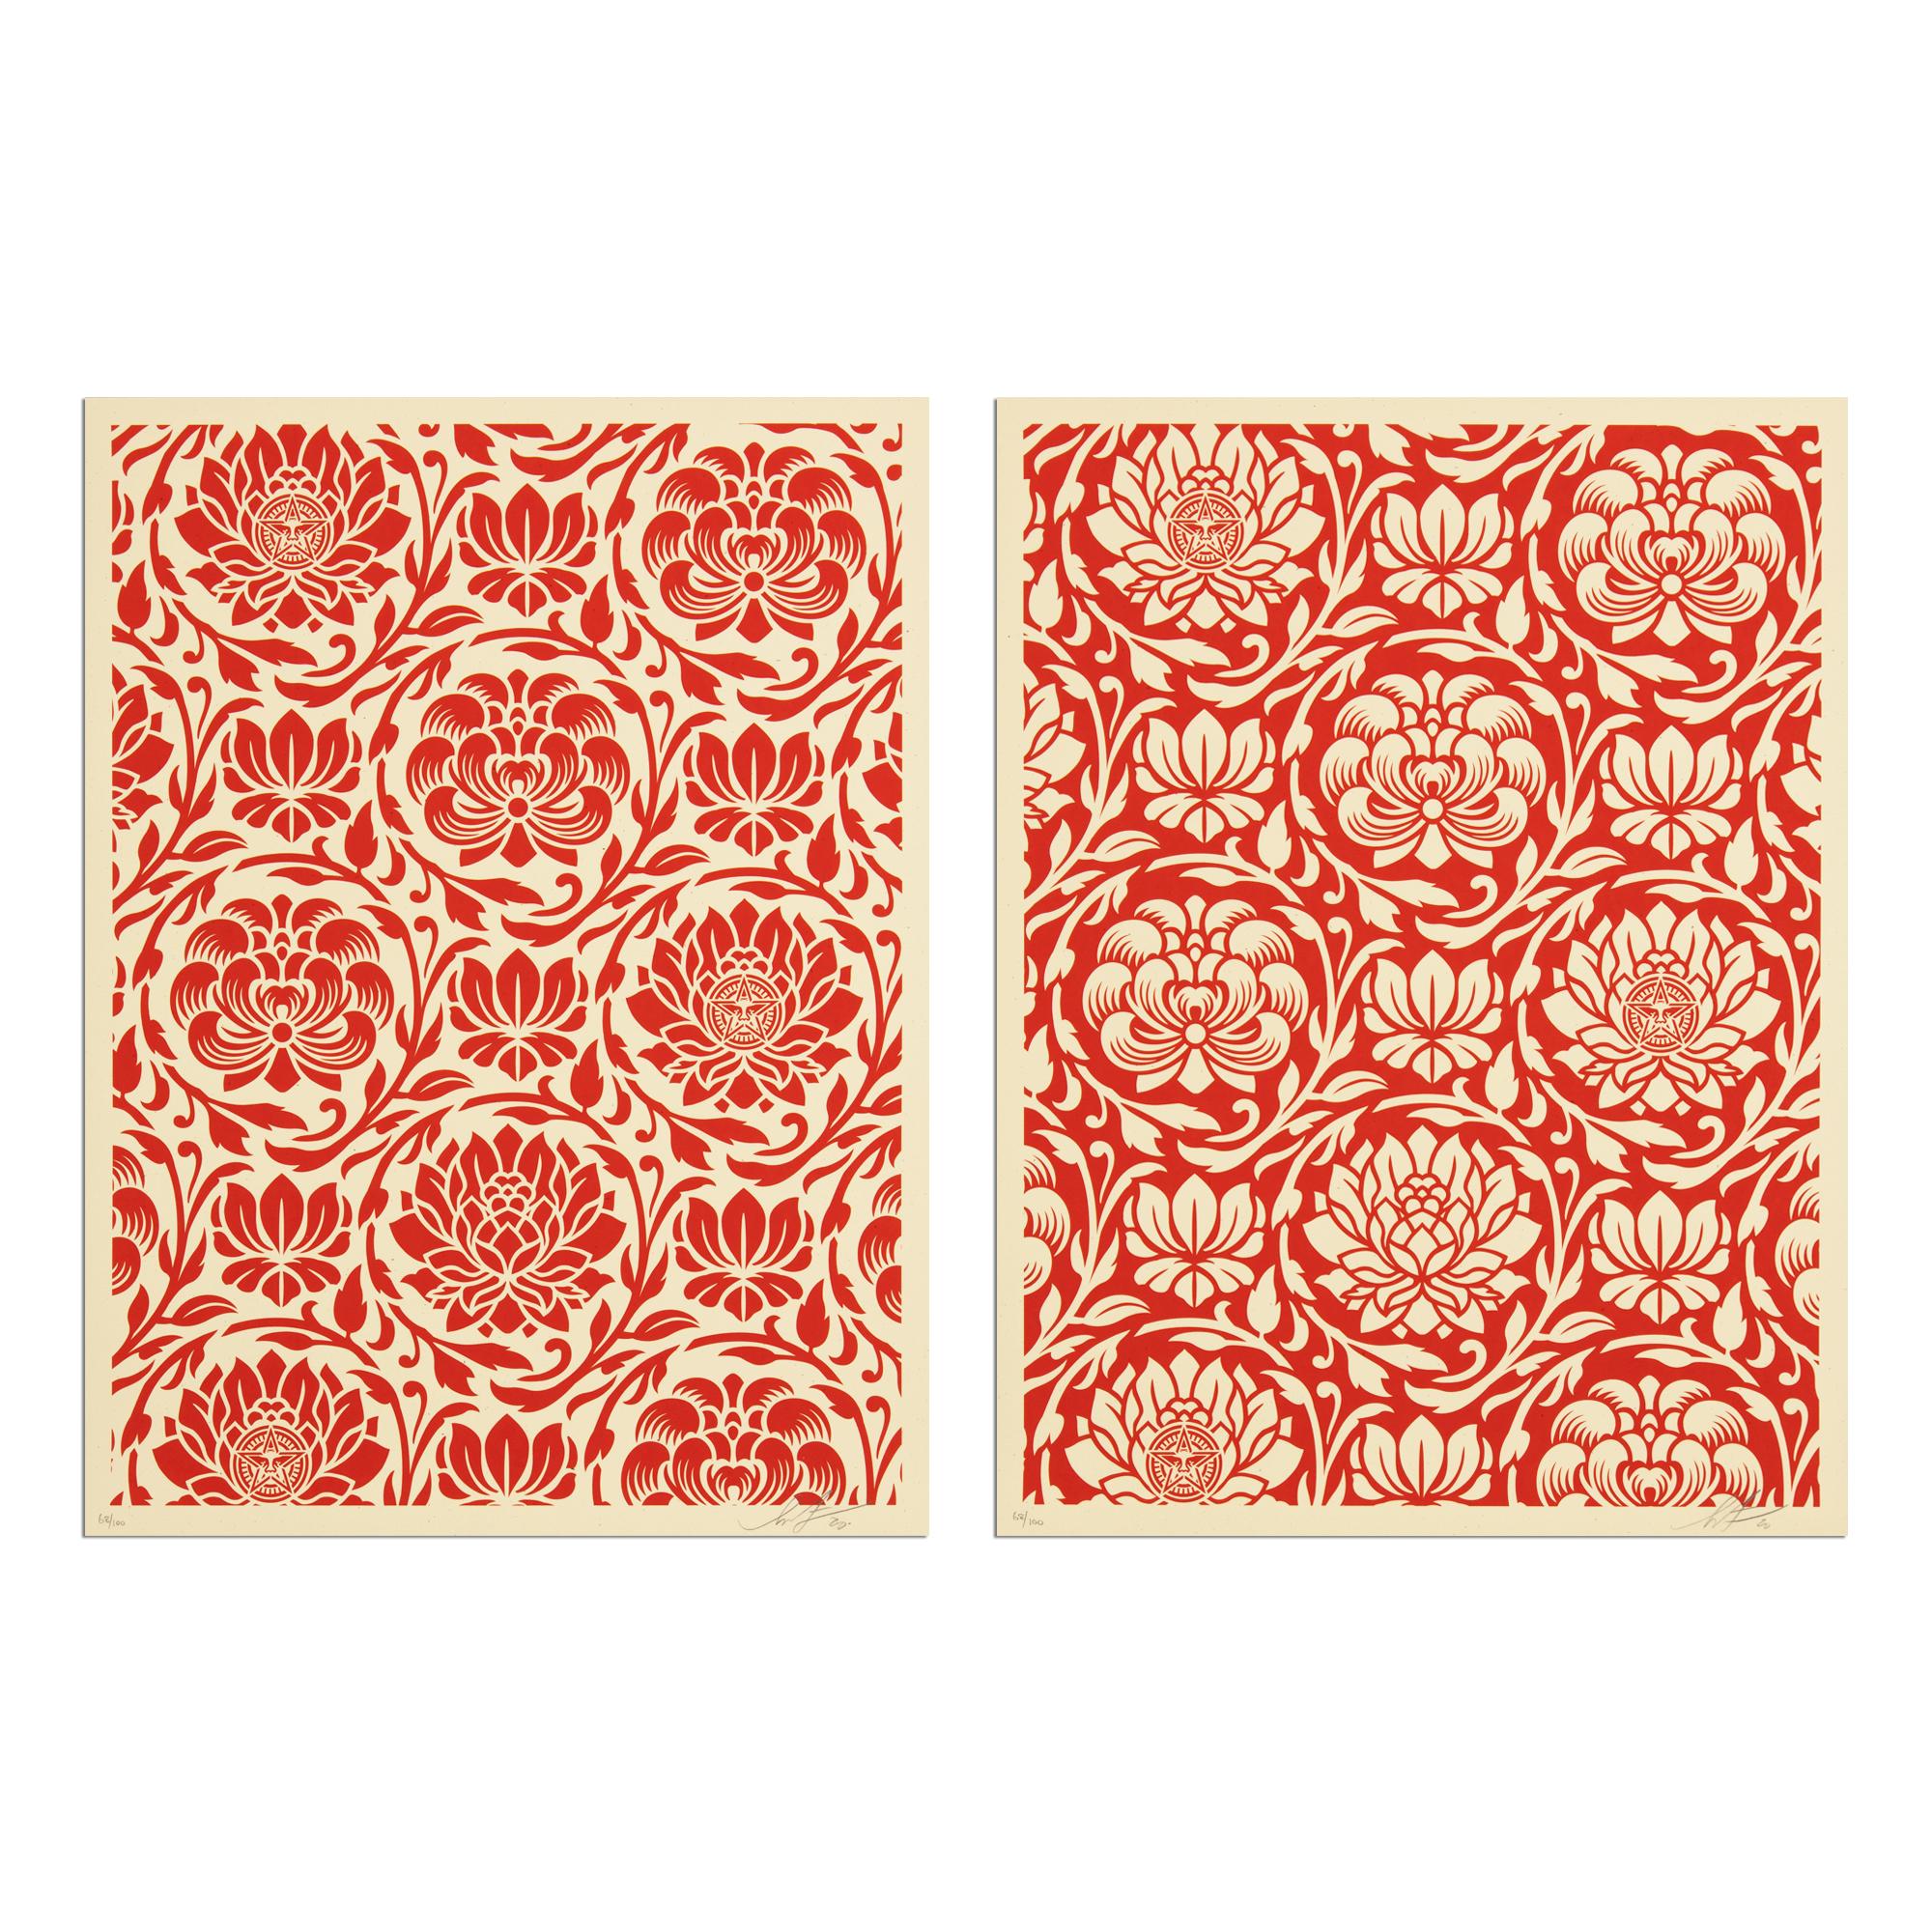 Shepard Fairey, Floral Harmony (Red Yin/Yang) - 2 Signed Prints, Street Art 